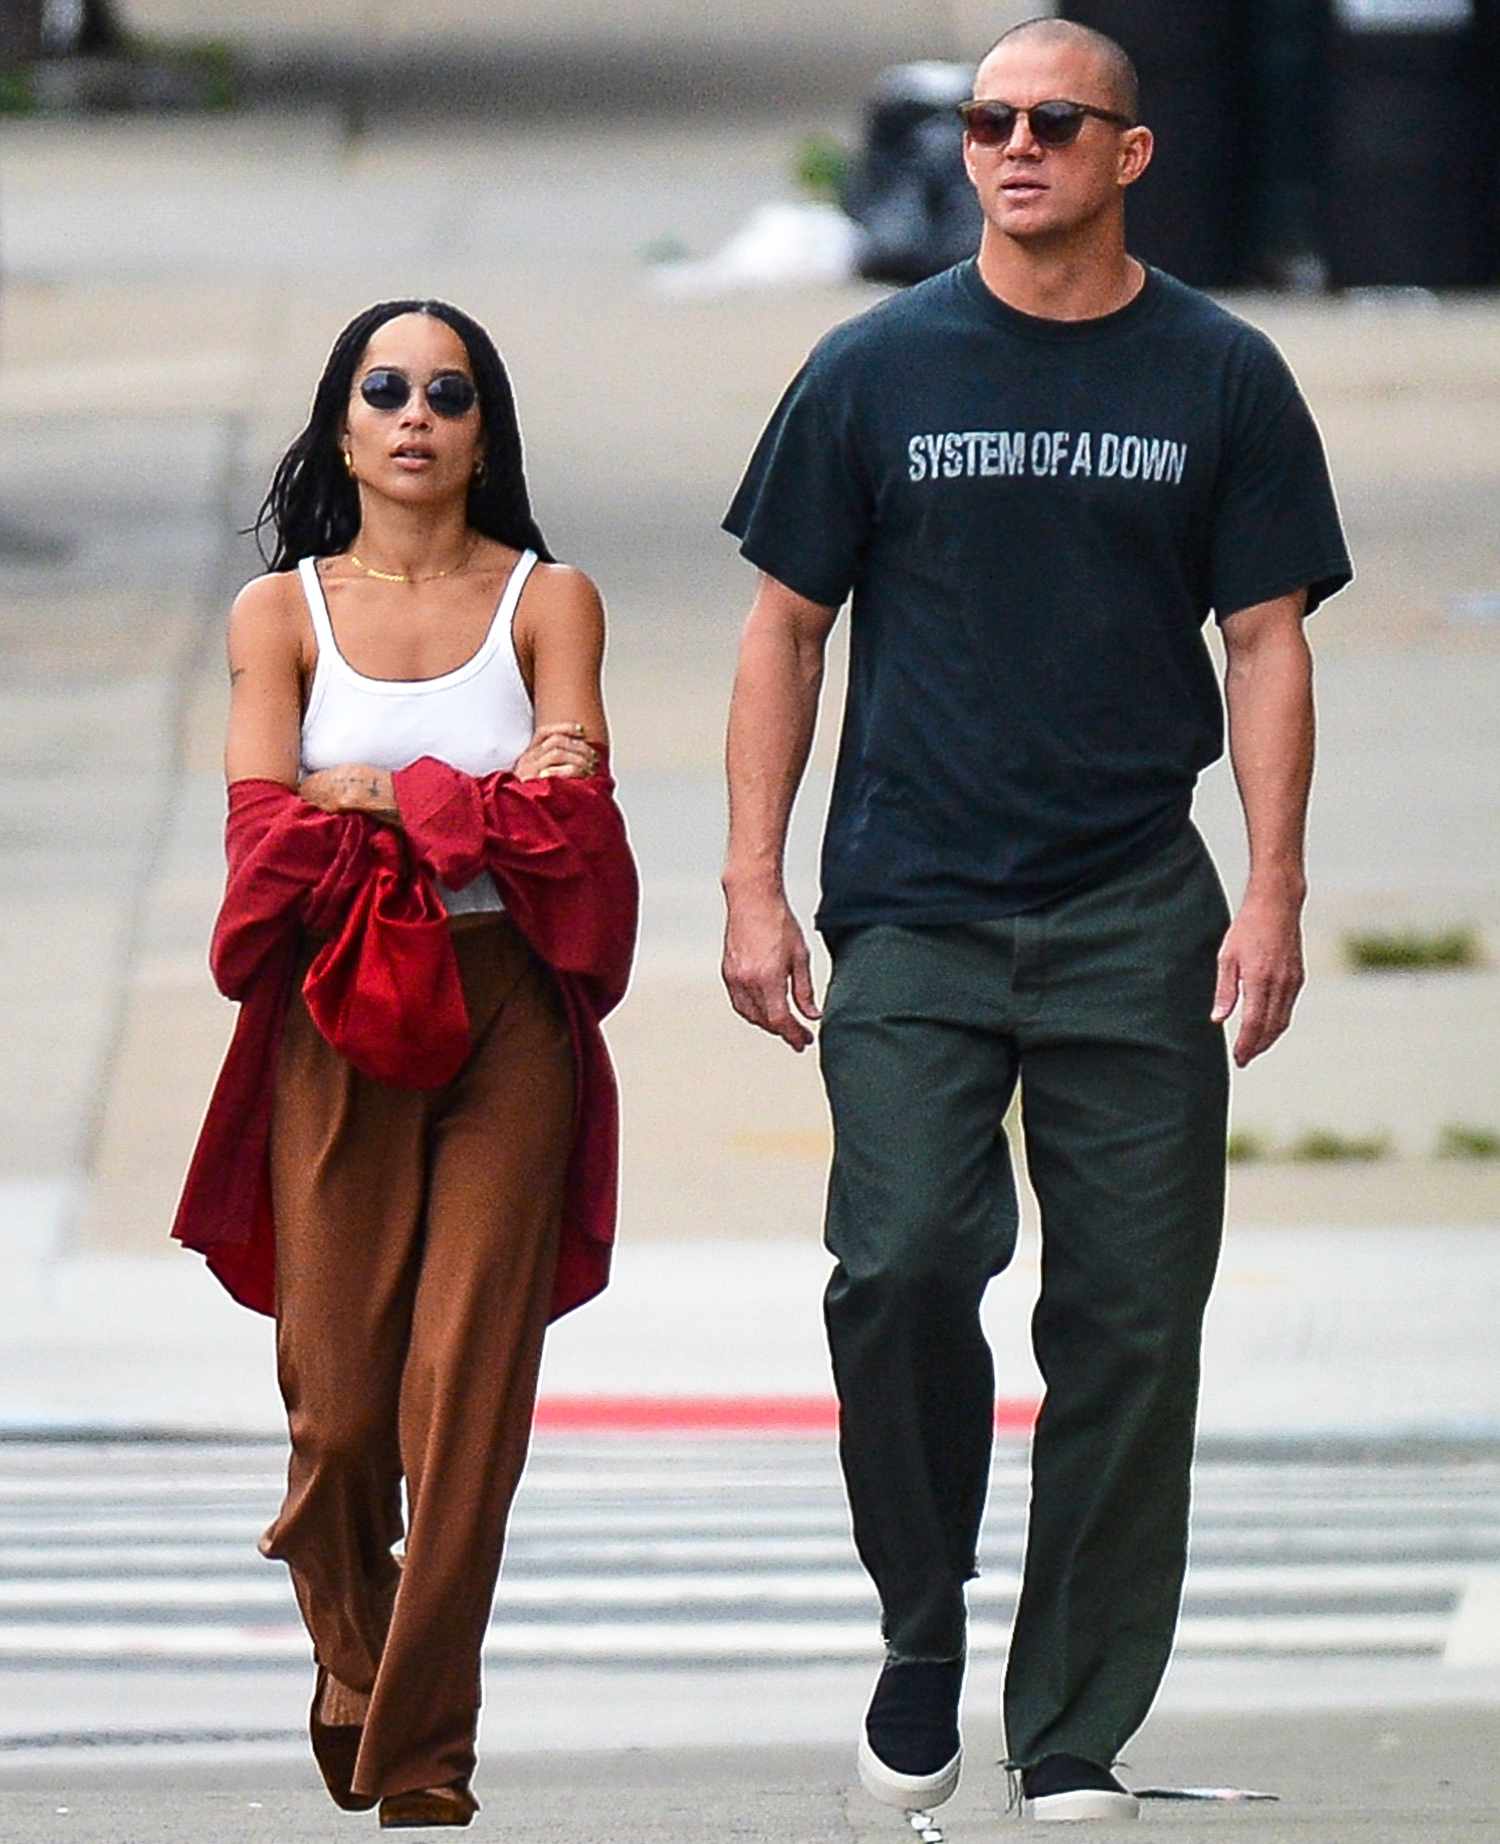 Inside Channing Tatum and Zoë Kravitz's New Romance: 'They Have This Cute and Flirty Chemistry'